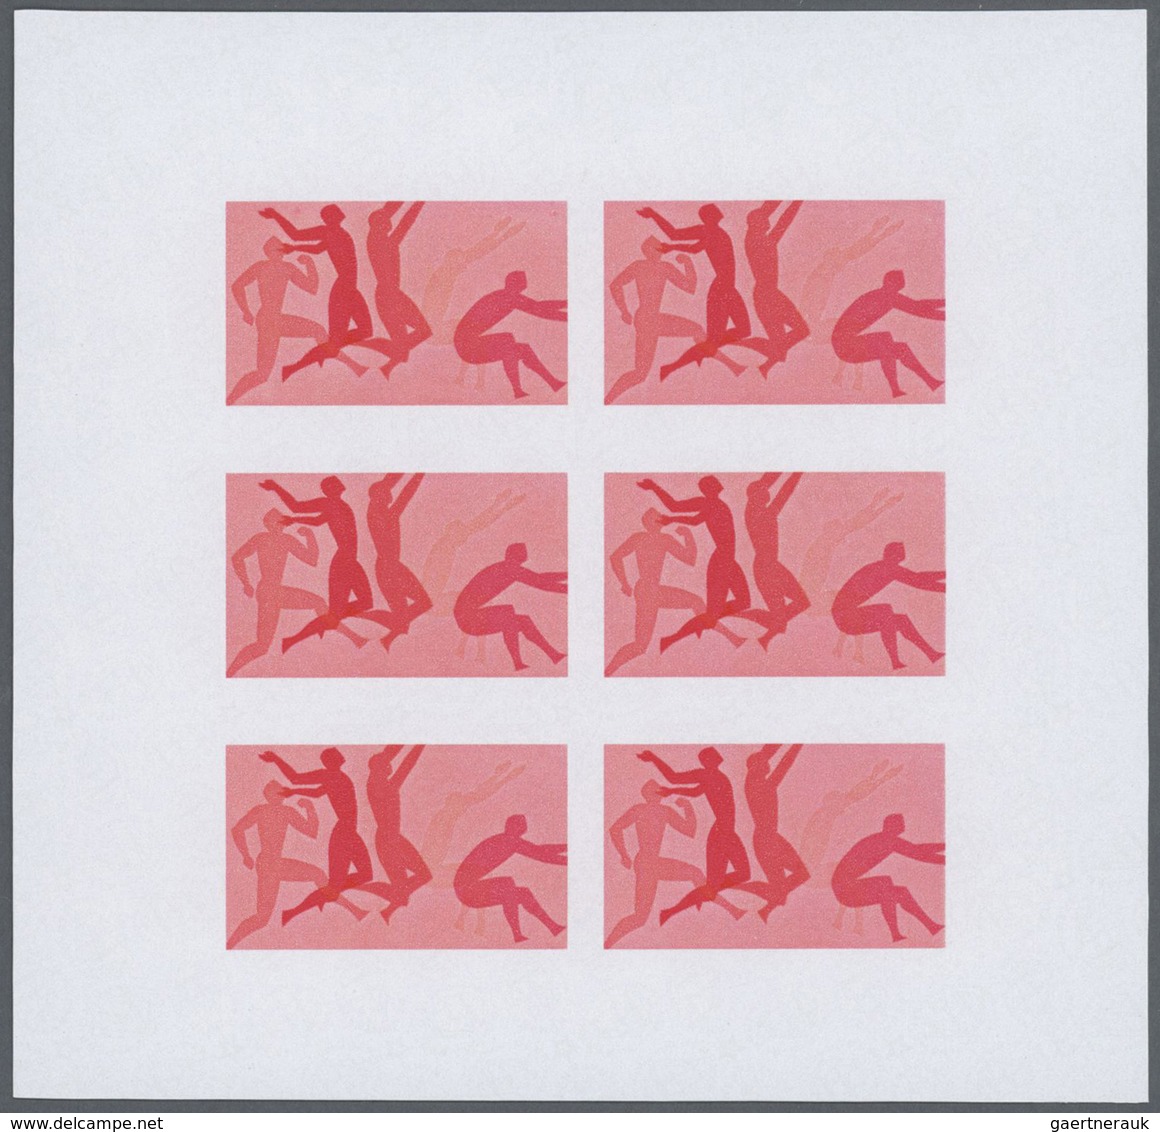 25328 Thematik: Olympische Spiele / olympic games: 1976, Penrhyn. Progressive proofs set of sheets for the